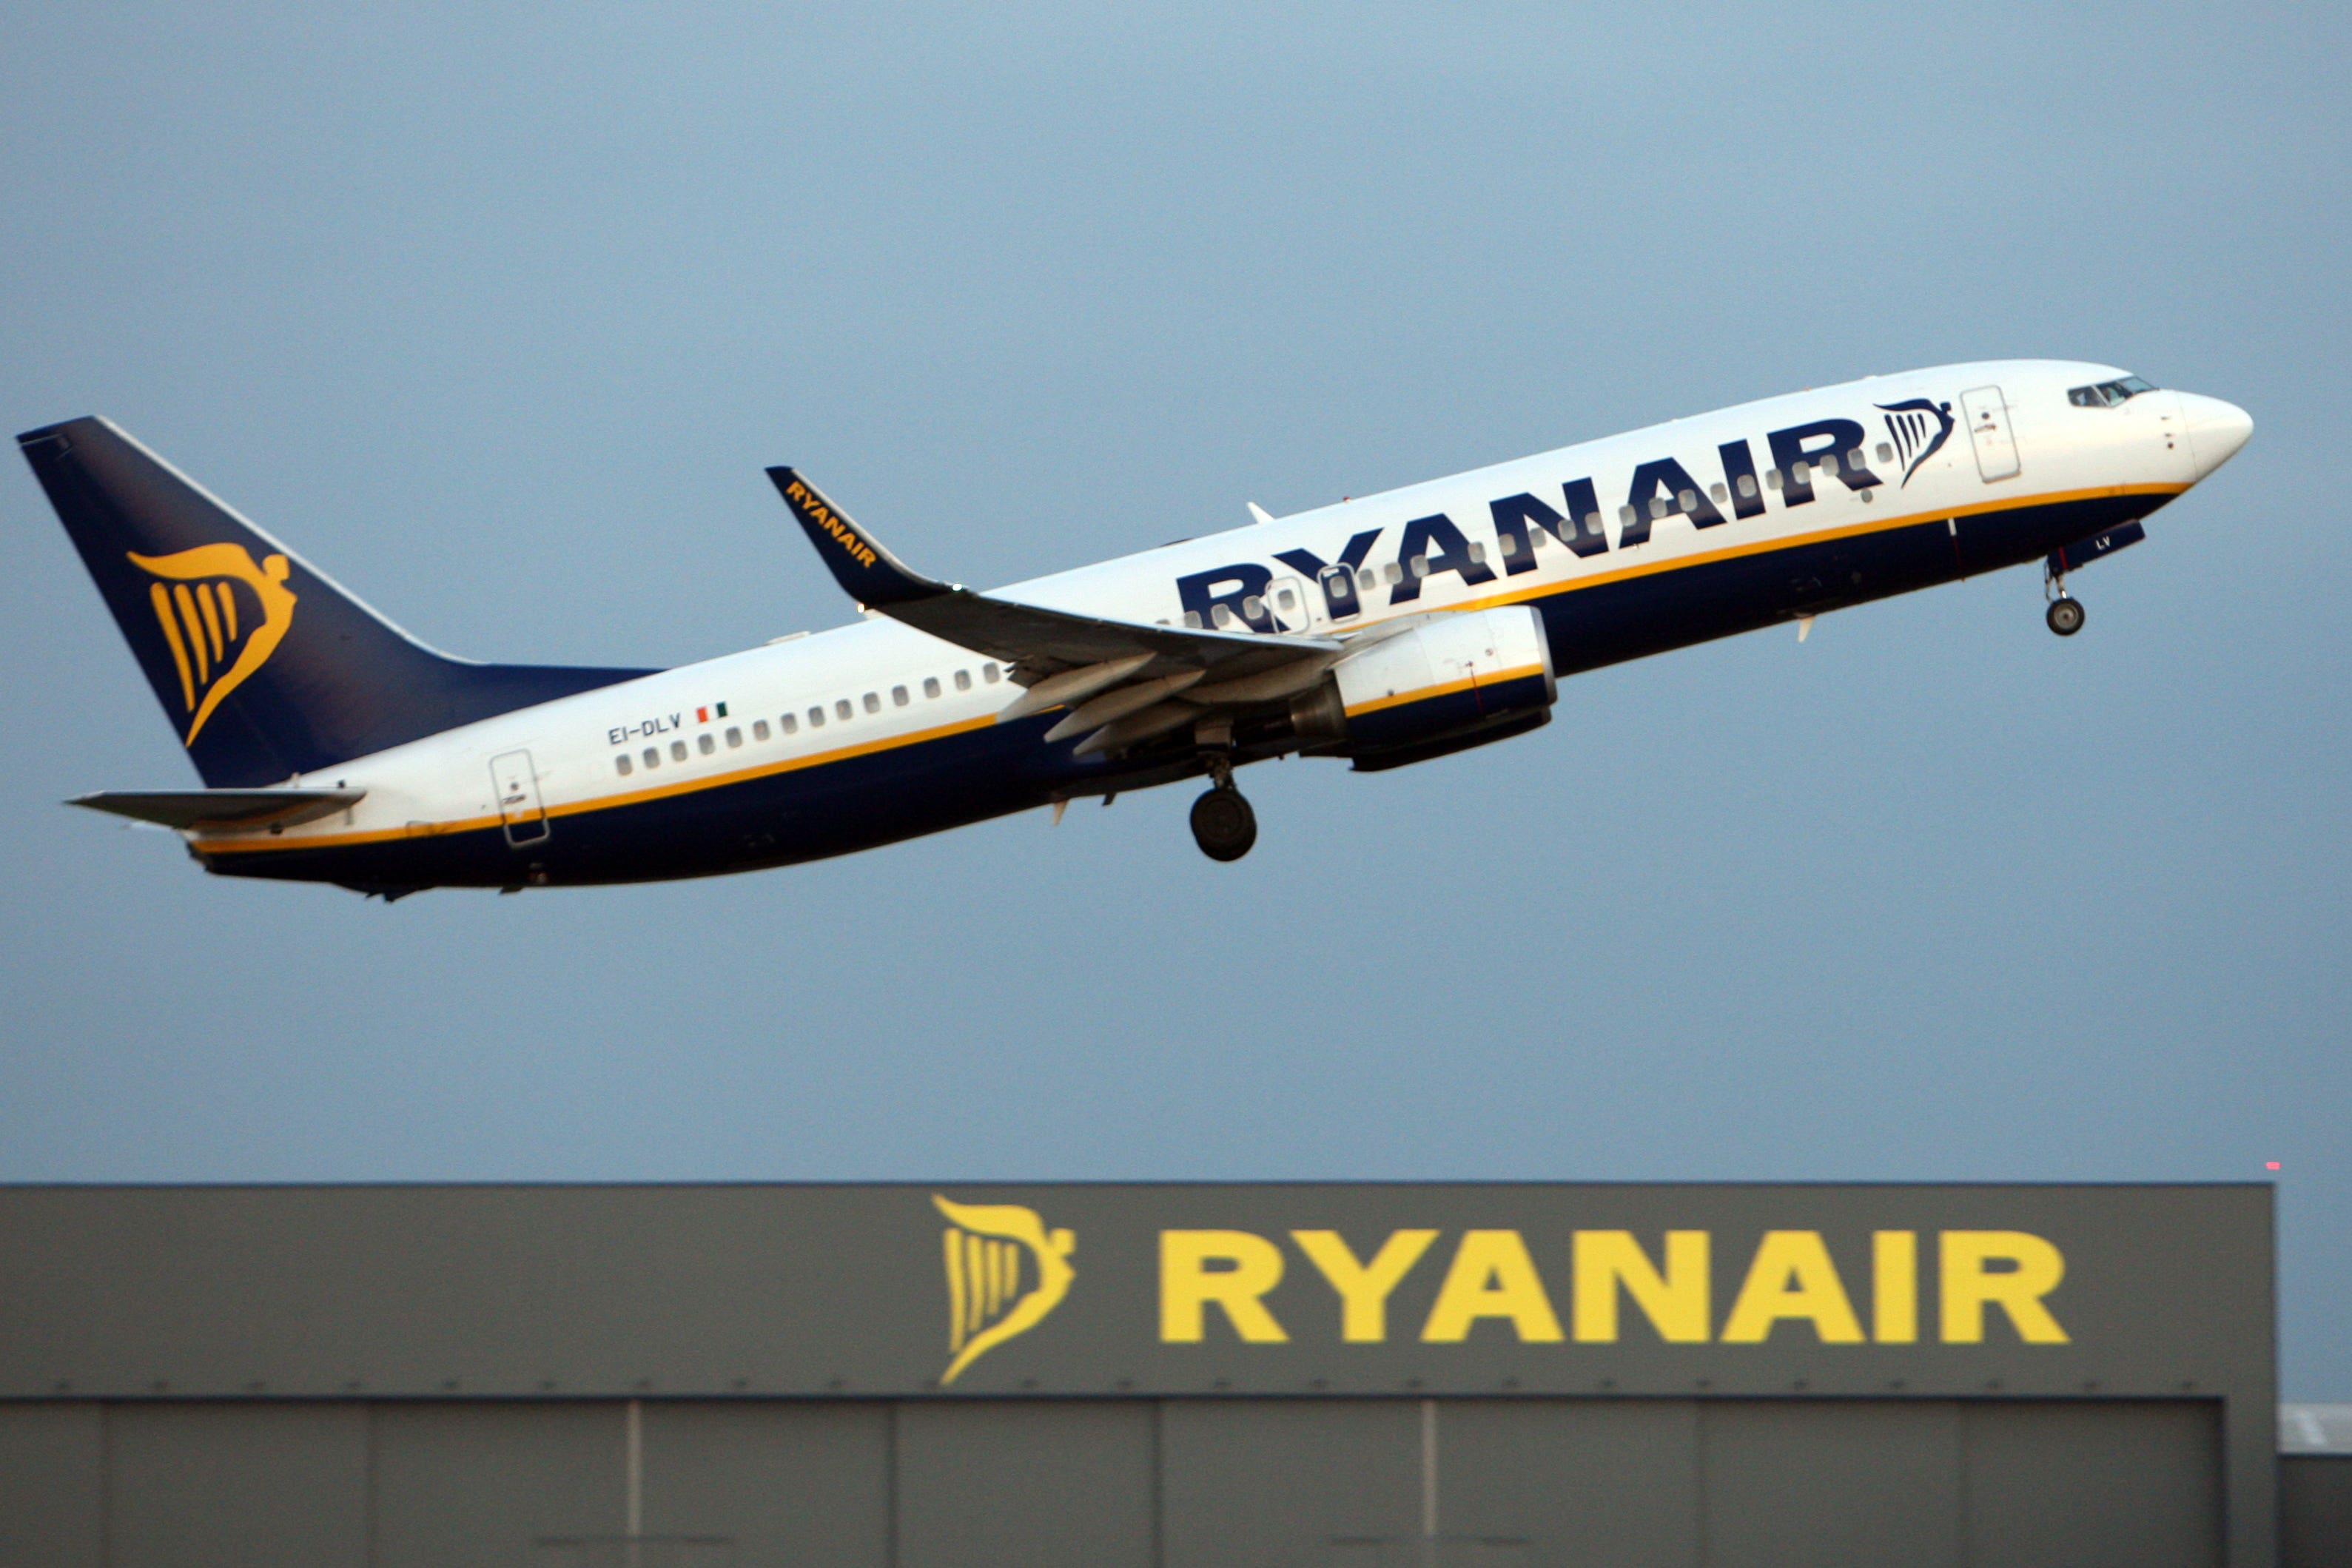 Thousands of Ryanair flights were targetted, according to the data